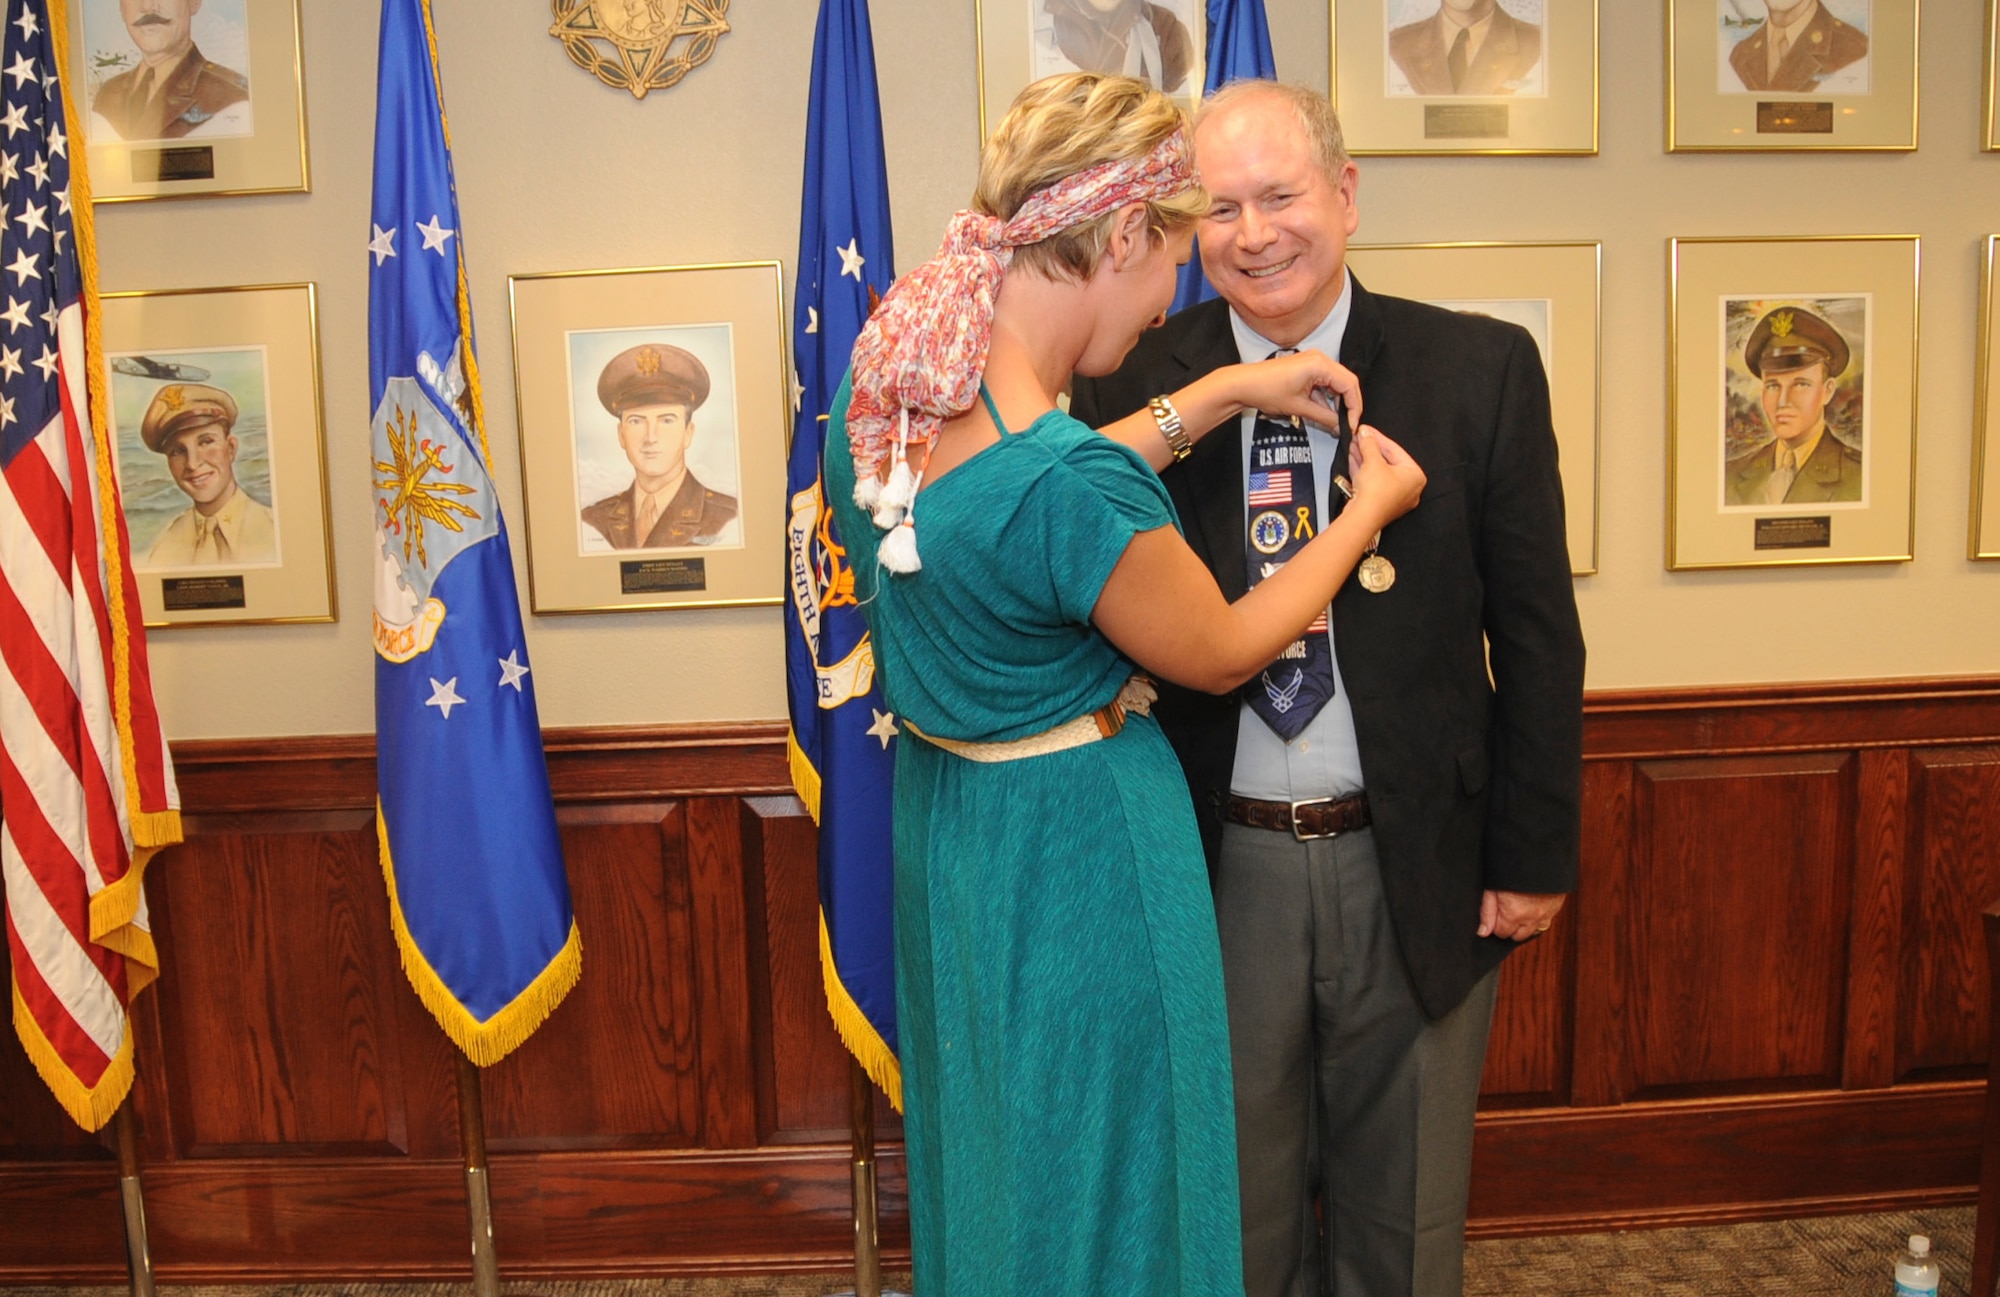 Ed Wempe, Eighth Air Force Intelligence Directorate technical director, receives a lapel pin from his daughter during a retirement ceremony at Barksdale Air Force Base, La., Aug. 18, 2016. Family, friends, colleagues and Air Force leadership joined Wempe to commemorate more than 45 years of service. (U.S. Air Force photo by Amn Alexis Schultz)